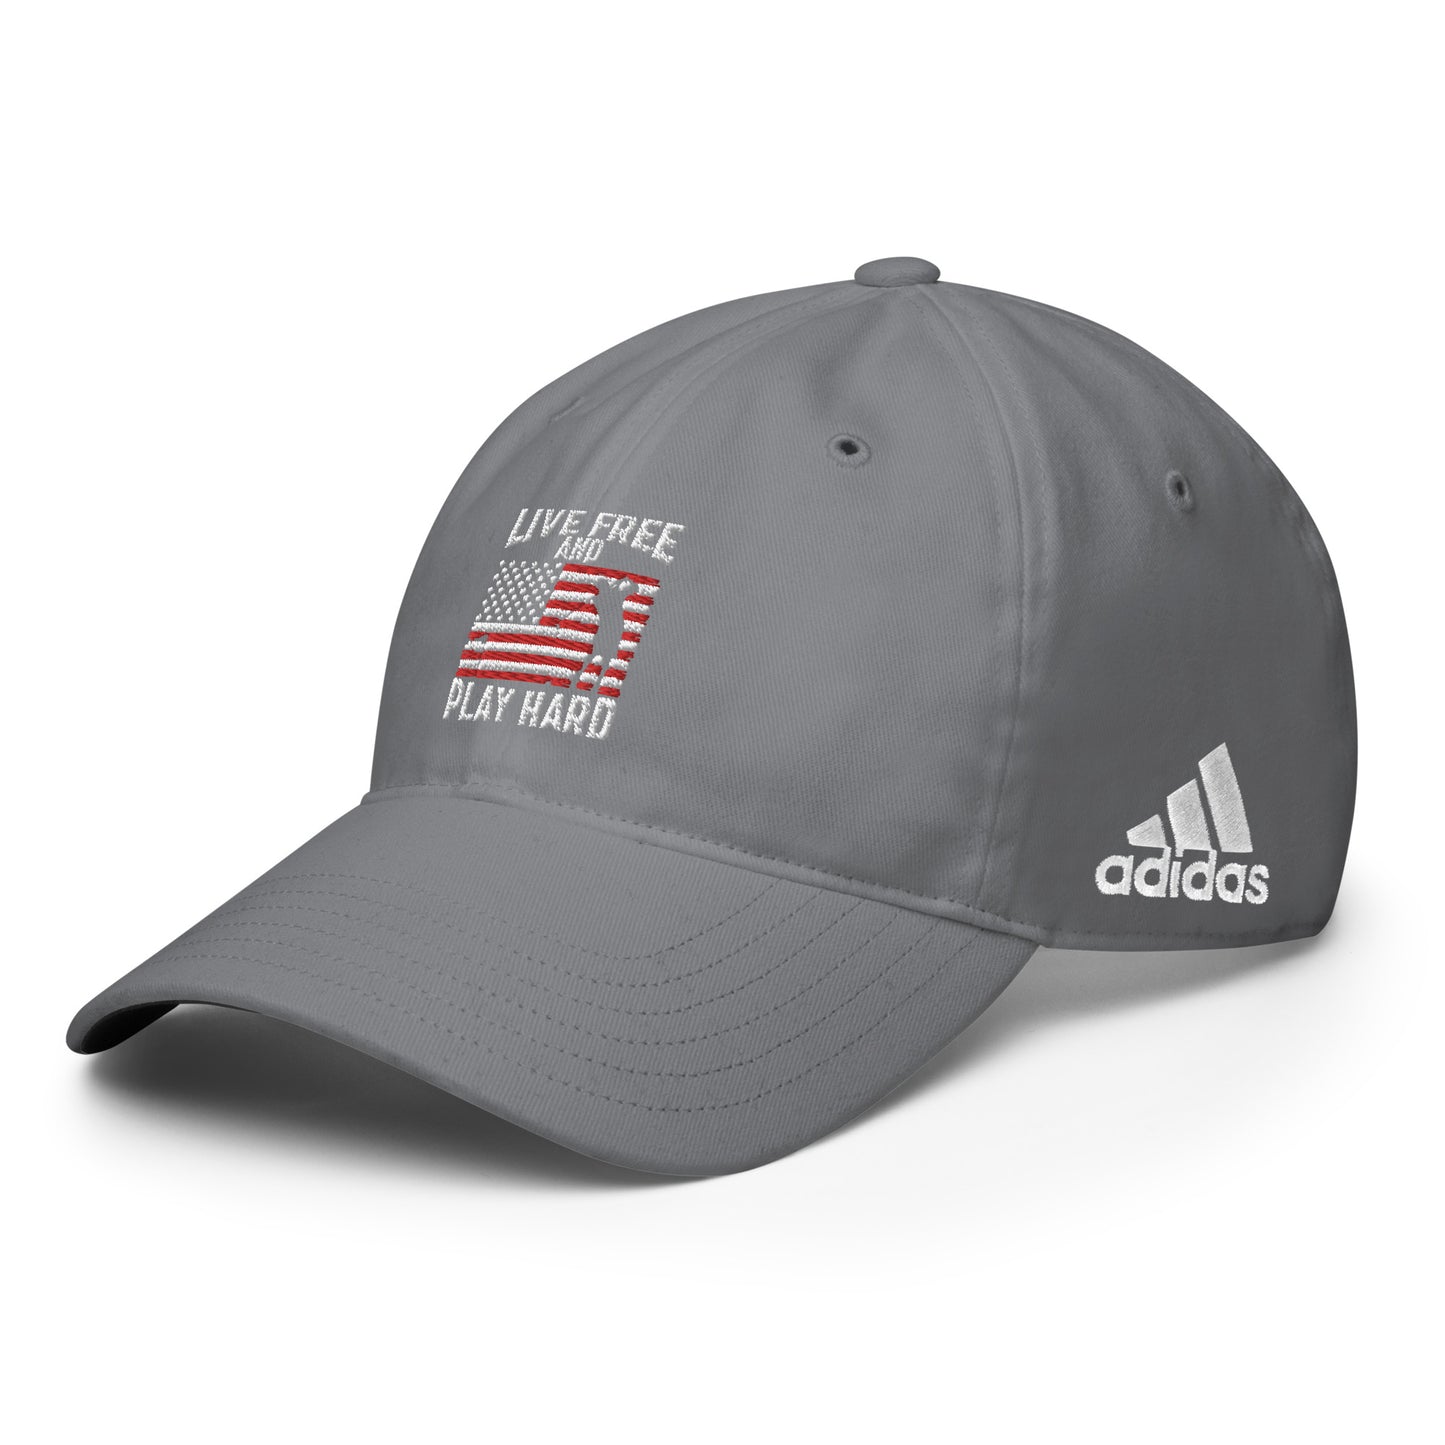 Adidas 'Live Free and Play Hard' Performance Golf Cap